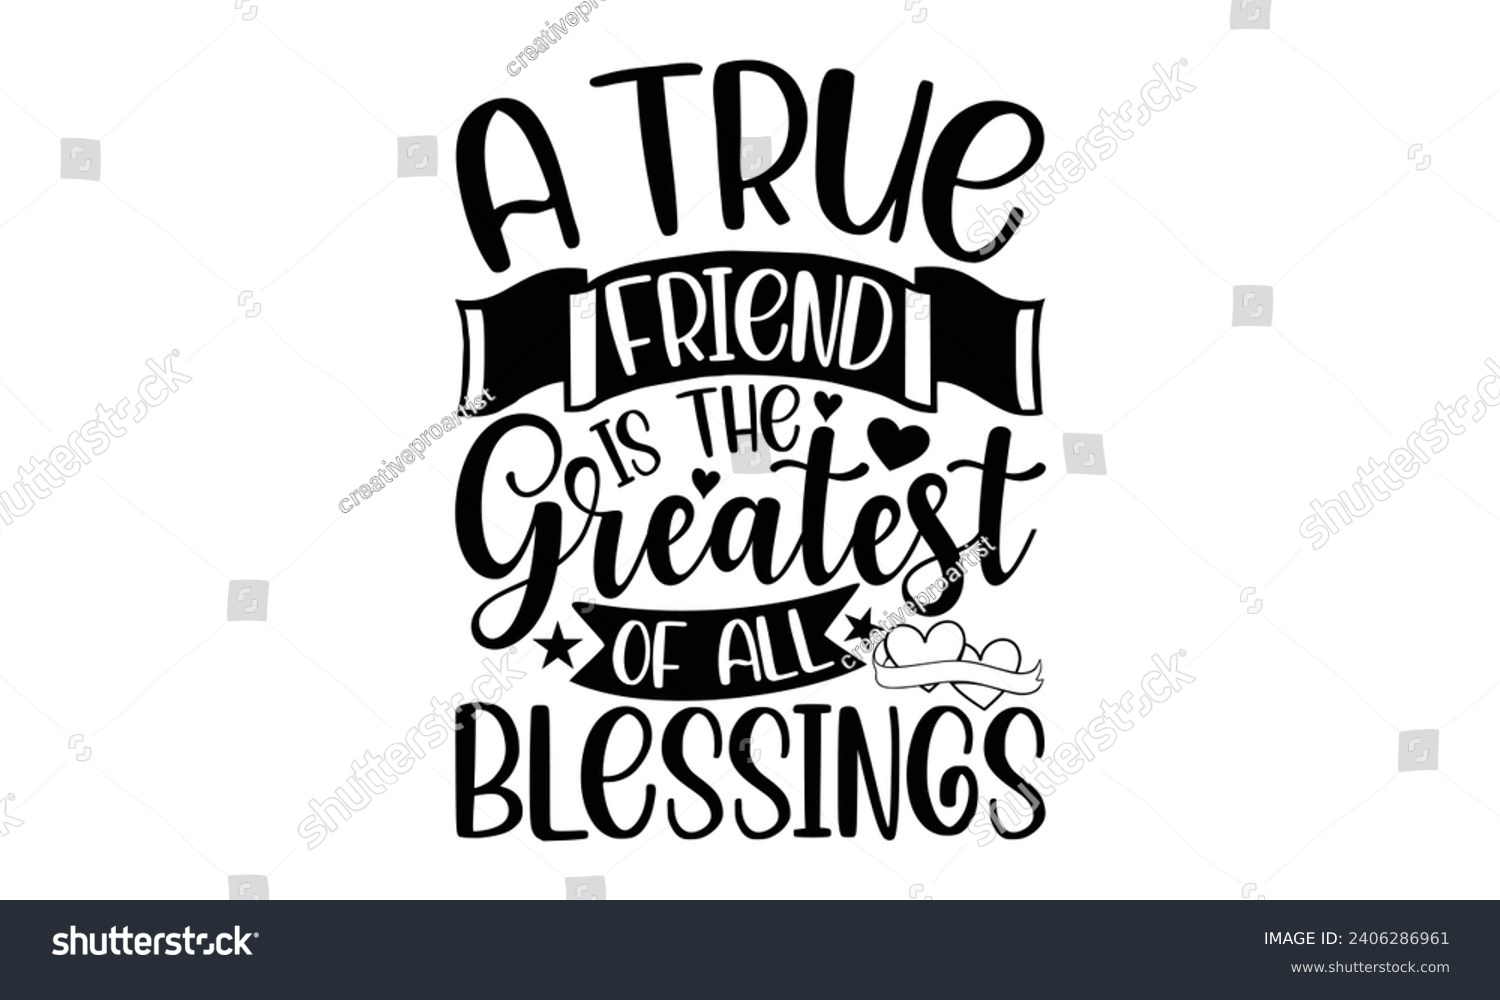 SVG of A True Friend Is The Greatest Of All Blessings- Best friends t- shirt design, Hand drawn vintage illustration with hand-lettering and decoration elements, greeting card template with typography text svg